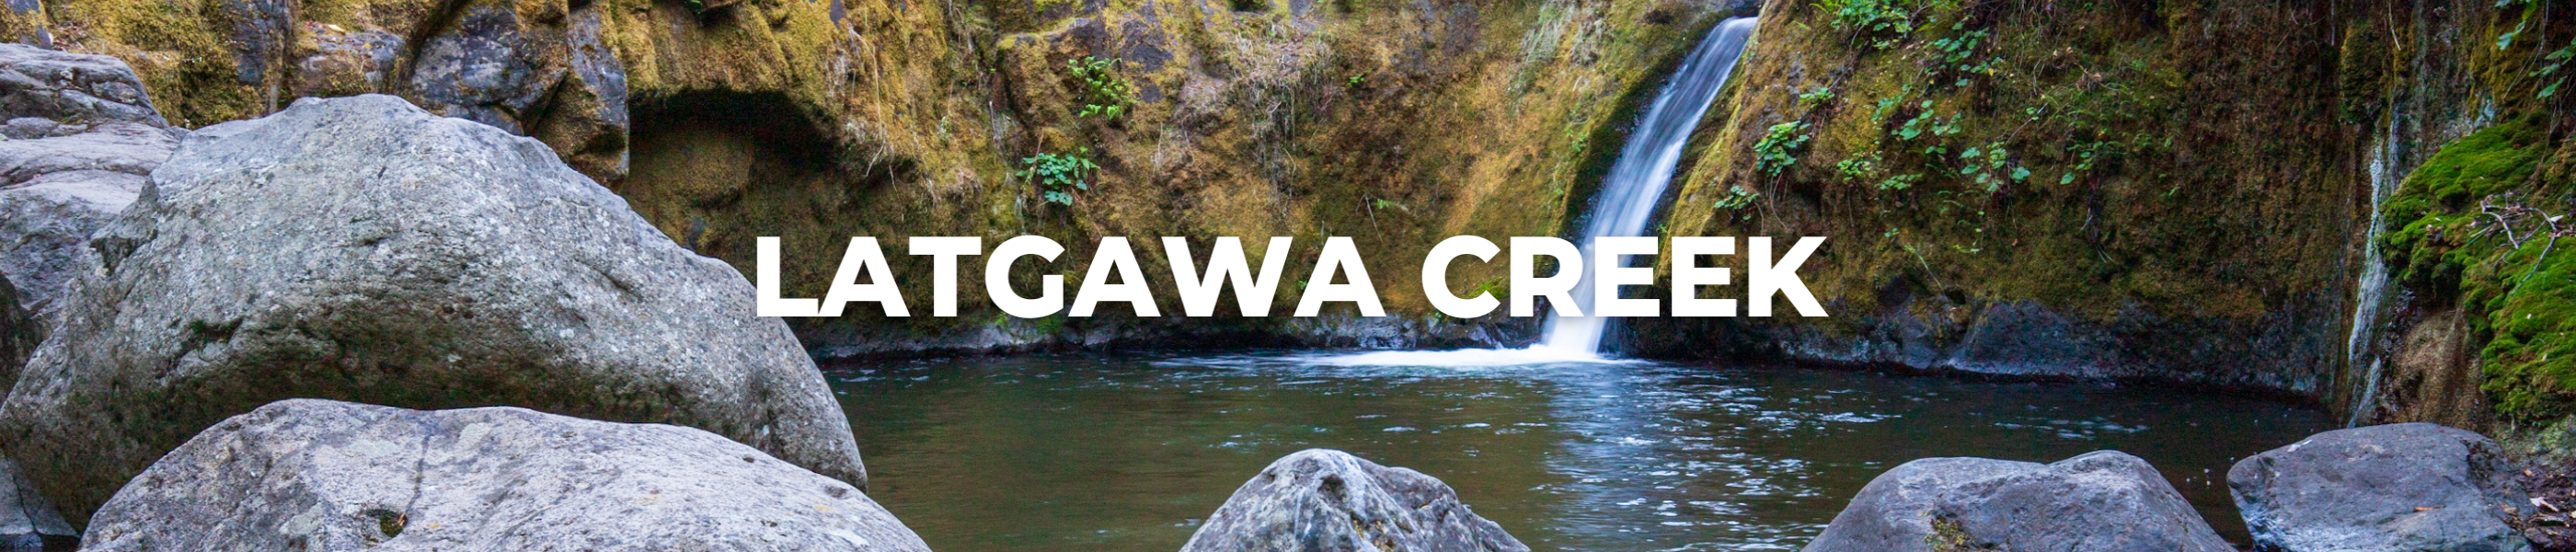 Latgawa Creek, renamed from Dead Indian Creek, Swimming Holes, Medford hiking and biking, outdoor adventure, things to do, 